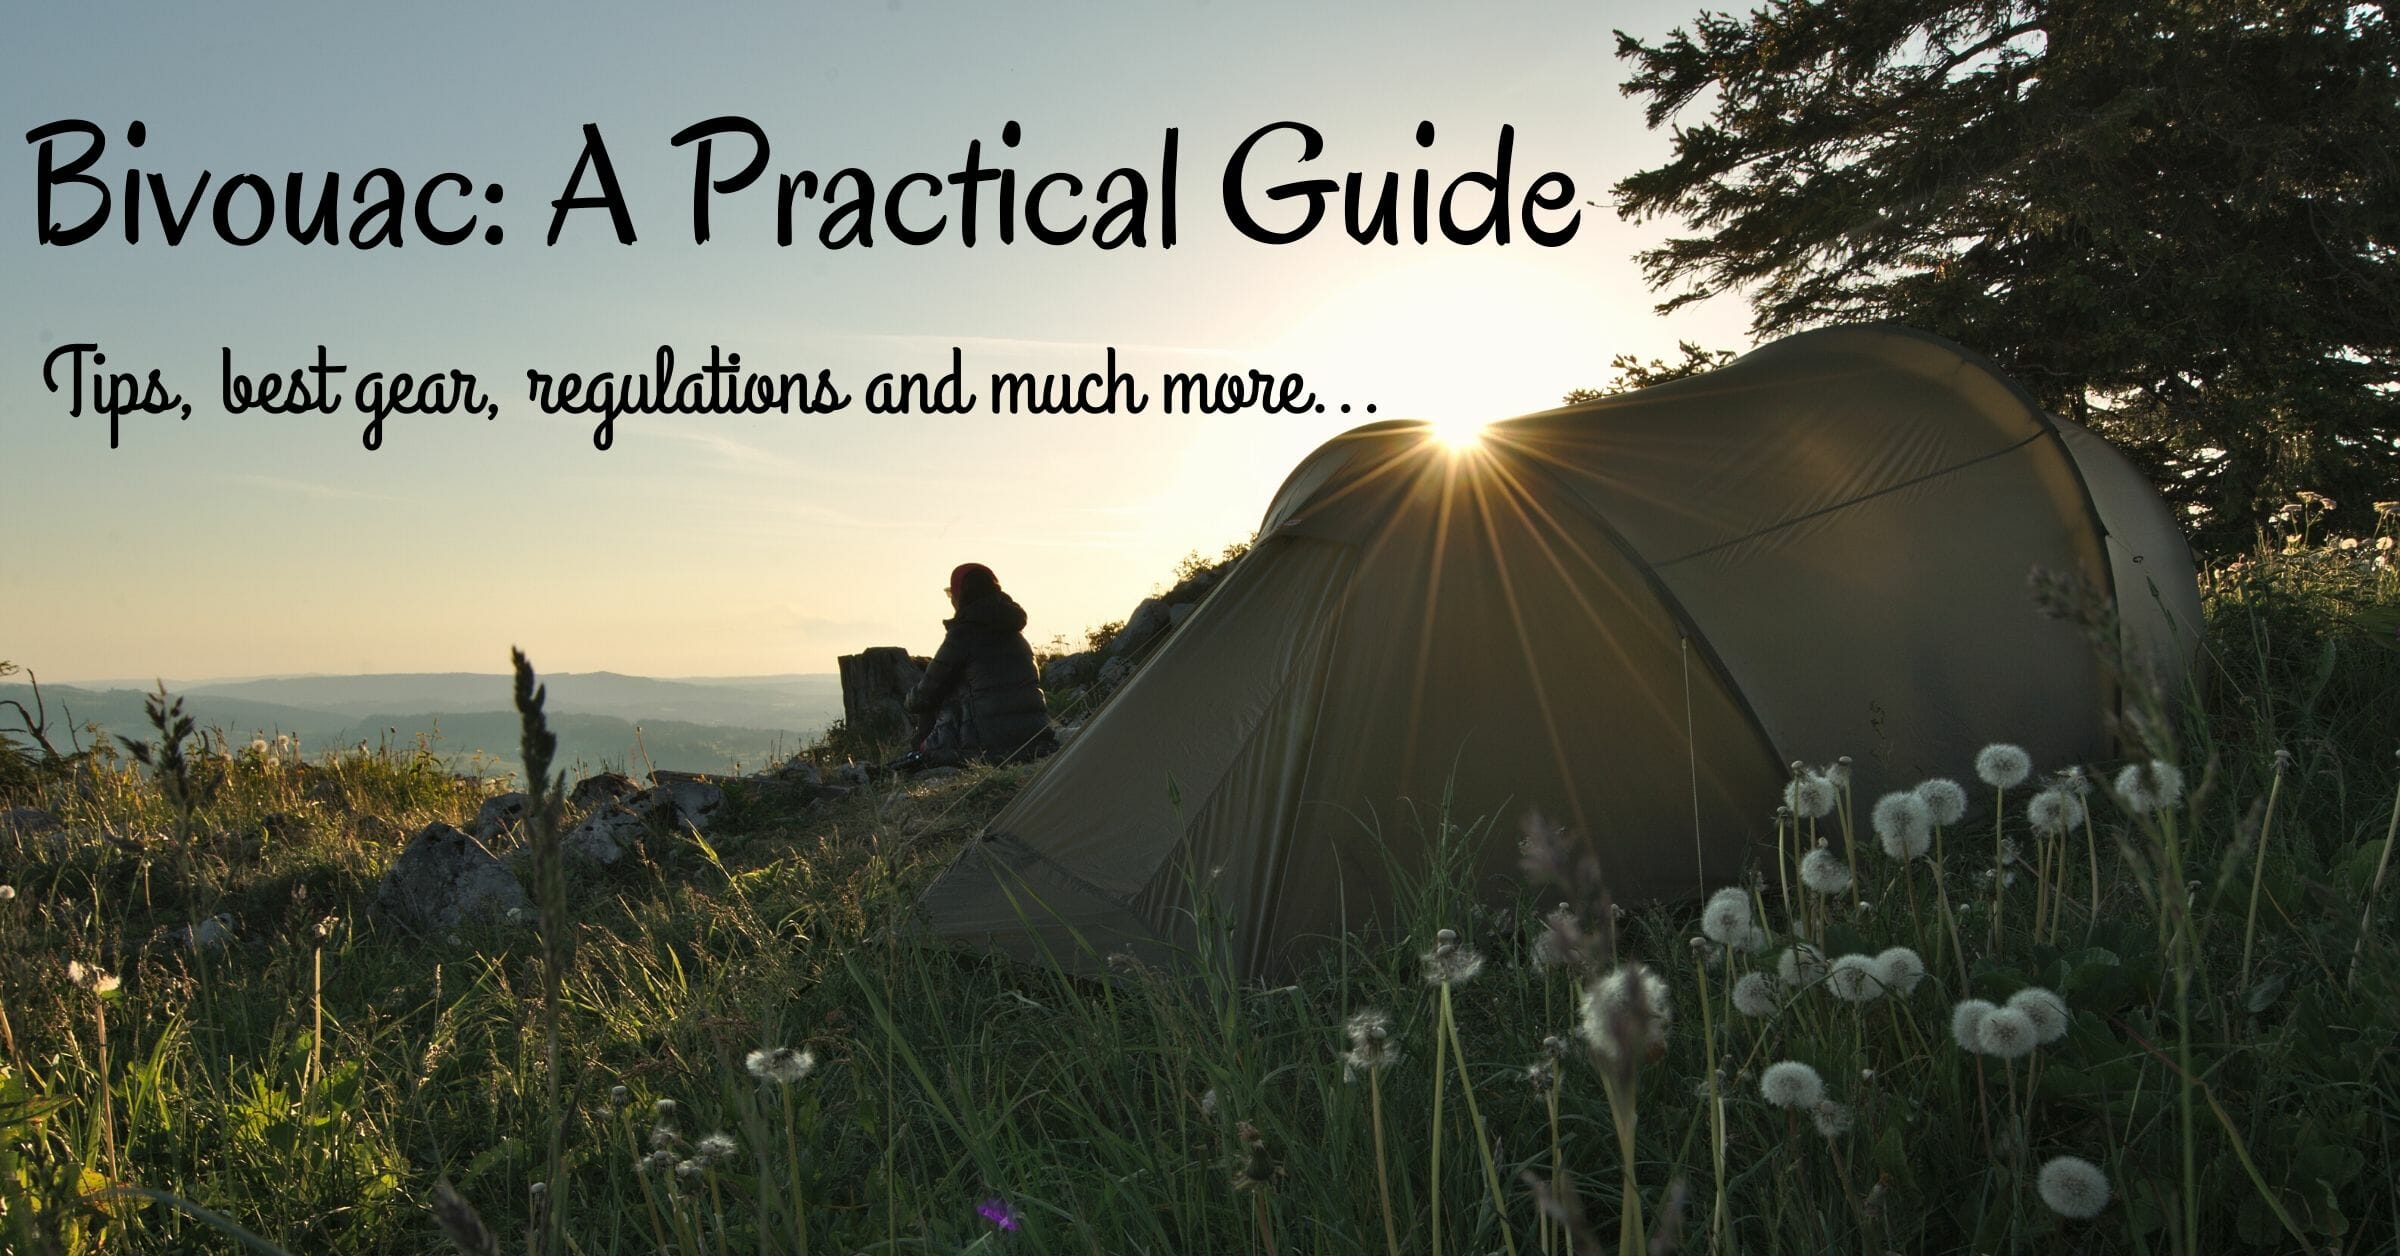 Complete guide to Bivouac / wild camping: Definition, essential